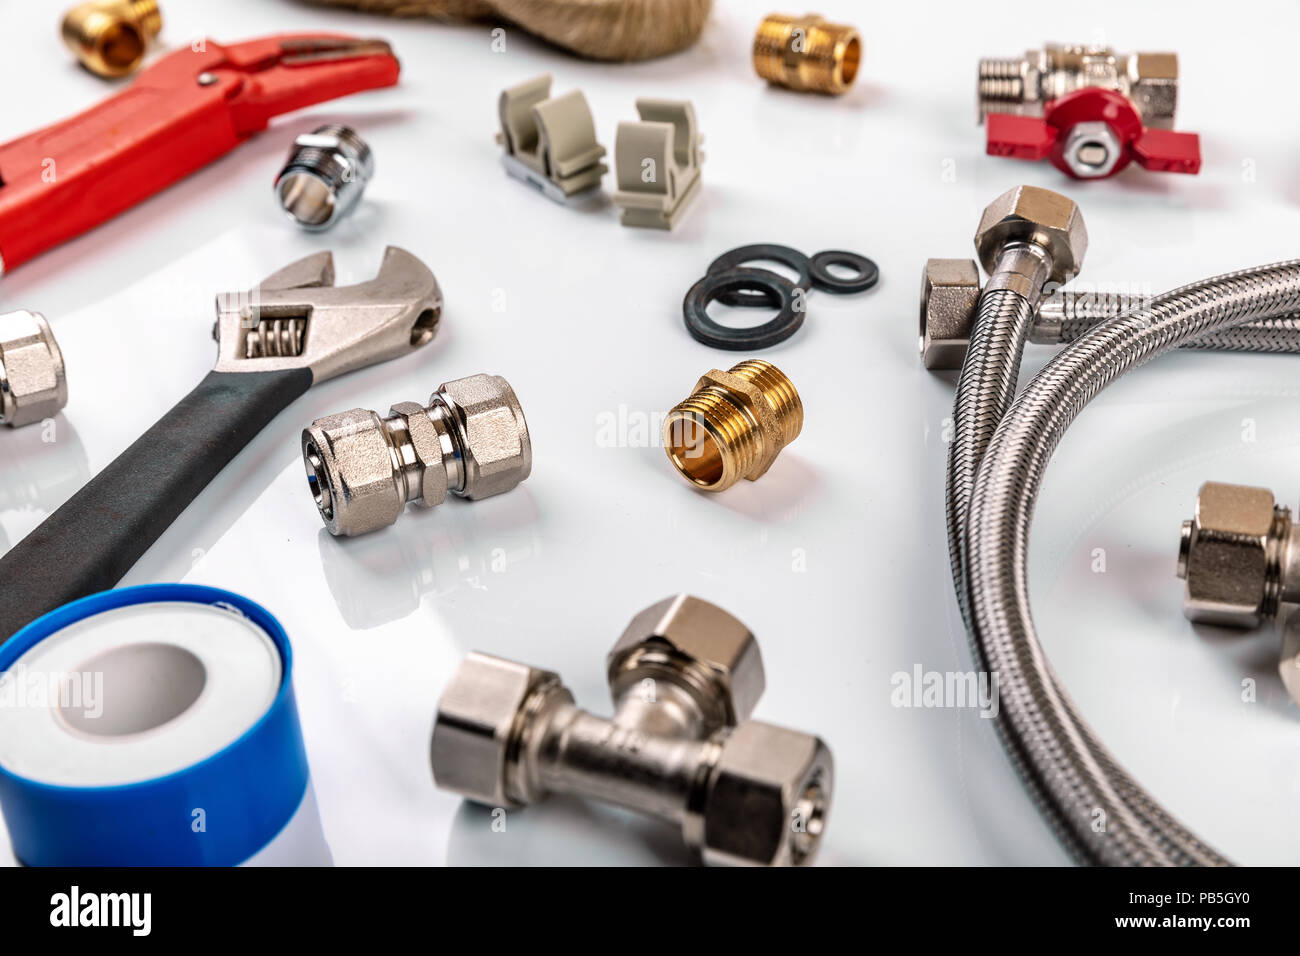 plumber tools and equipment on white background Stock Photo